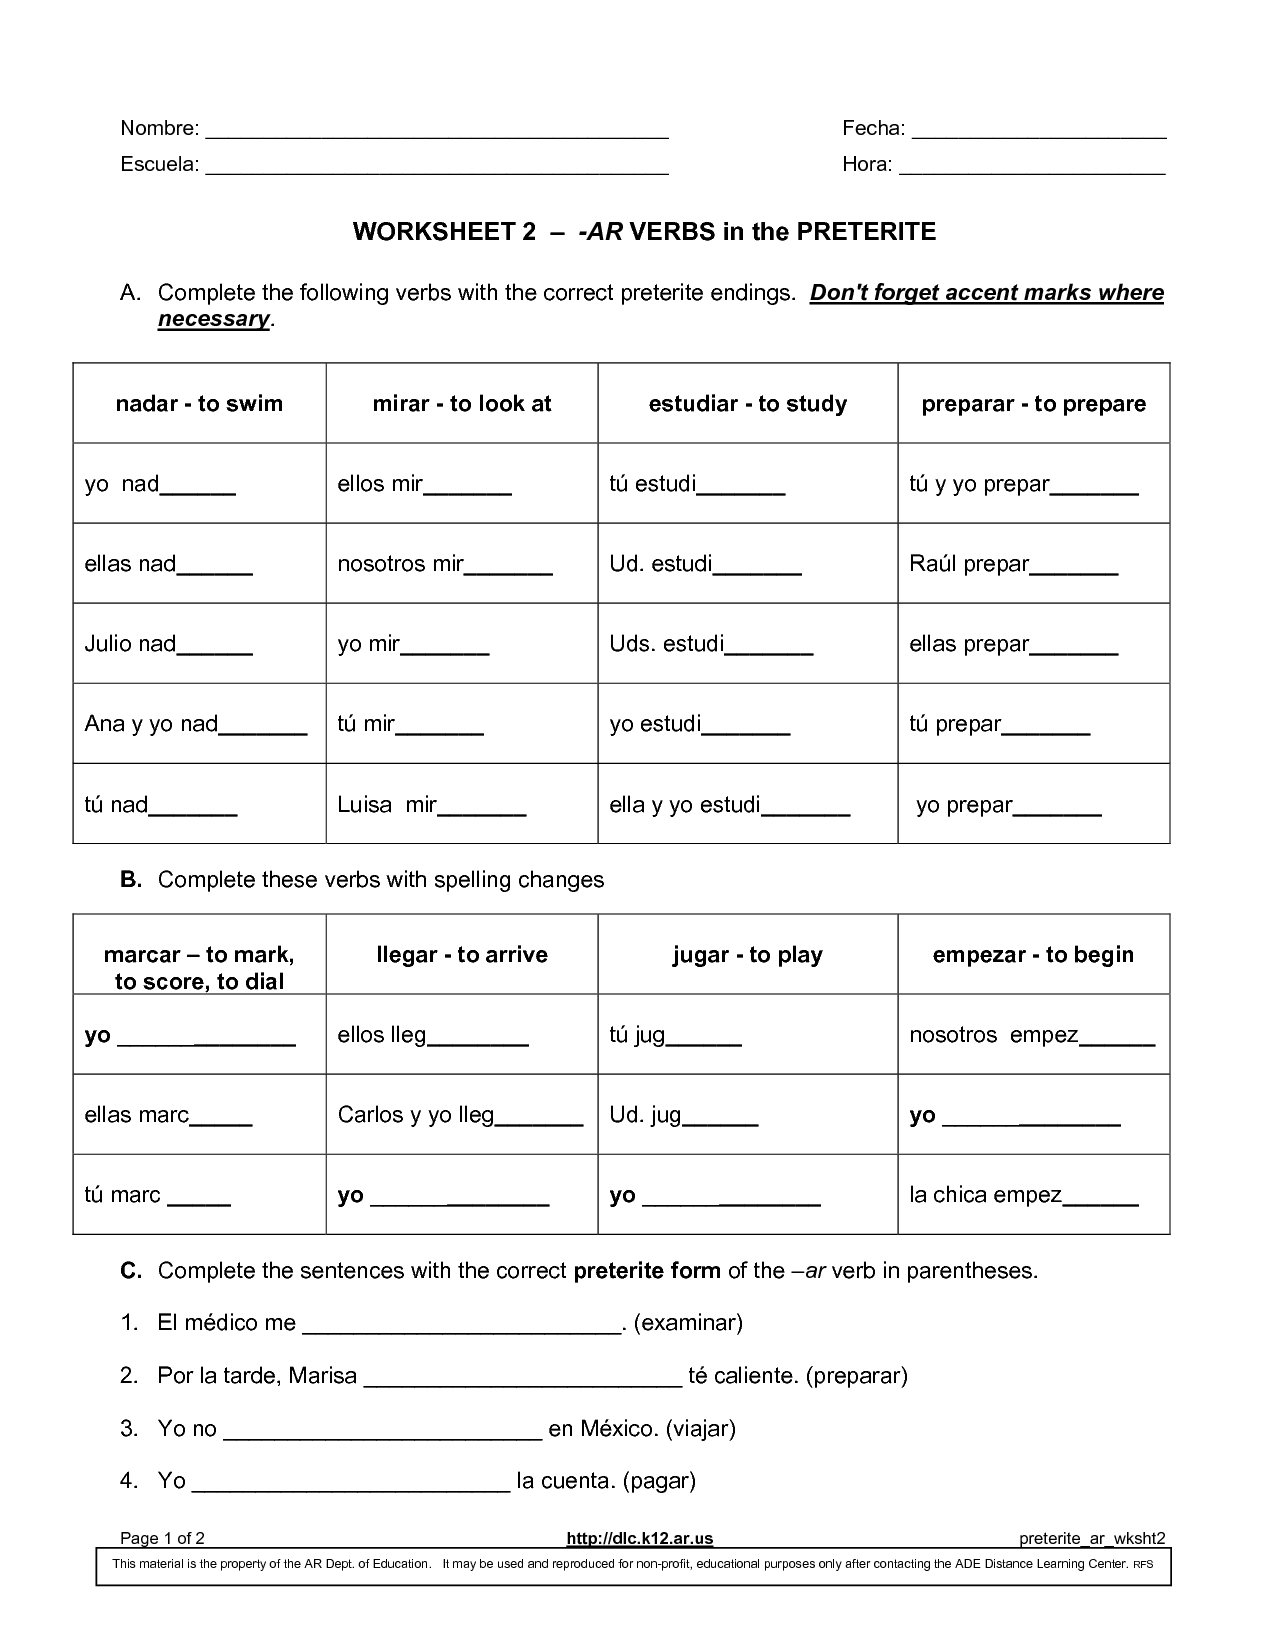 18-best-images-of-spanish-verb-worksheets-spanish-verb-conjugation-worksheets-blank-spanish